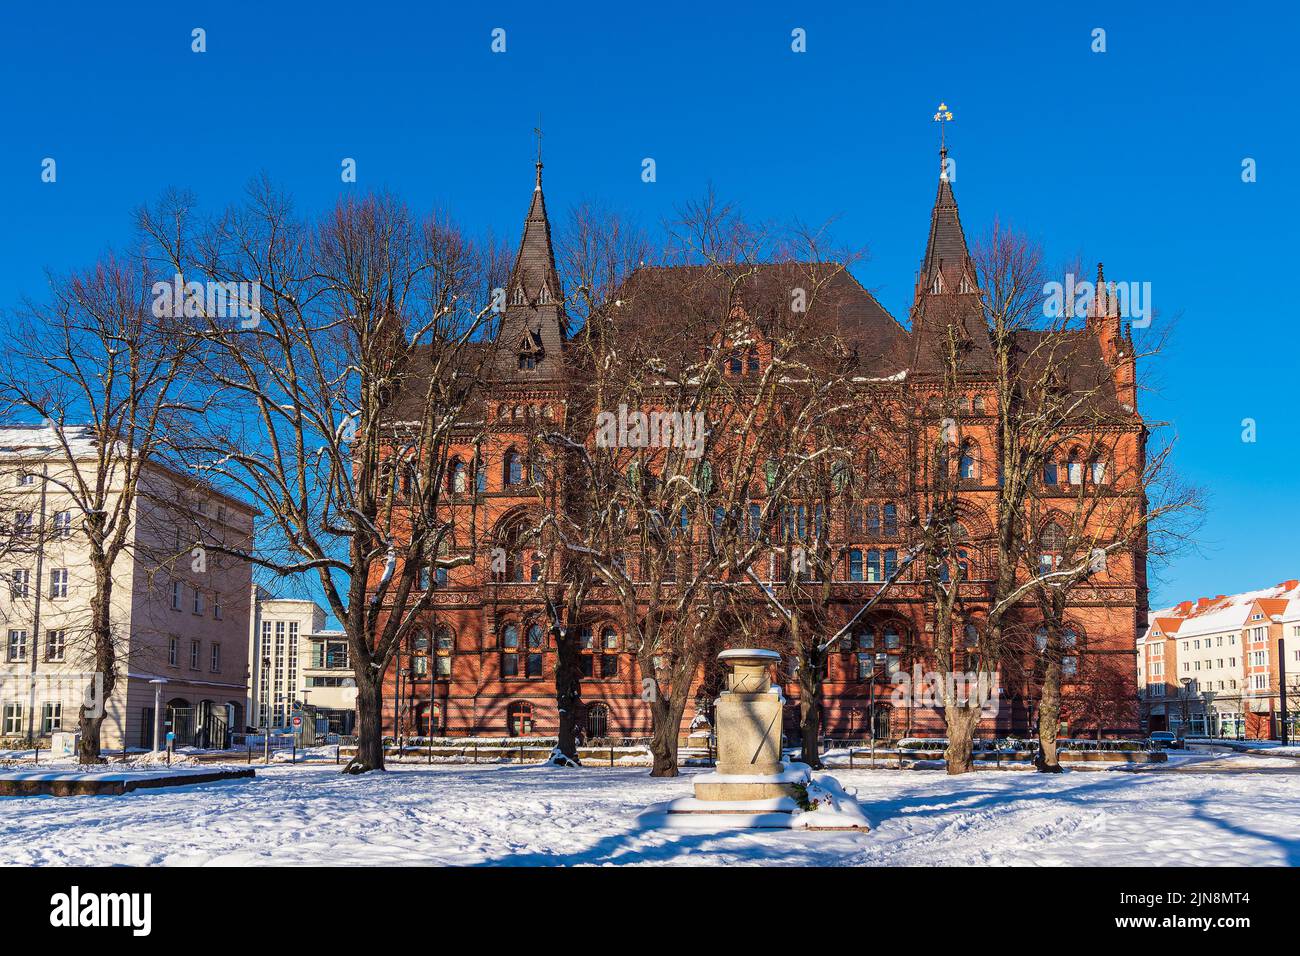 Historical buildings in the city Rostock, Germany. Stock Photo